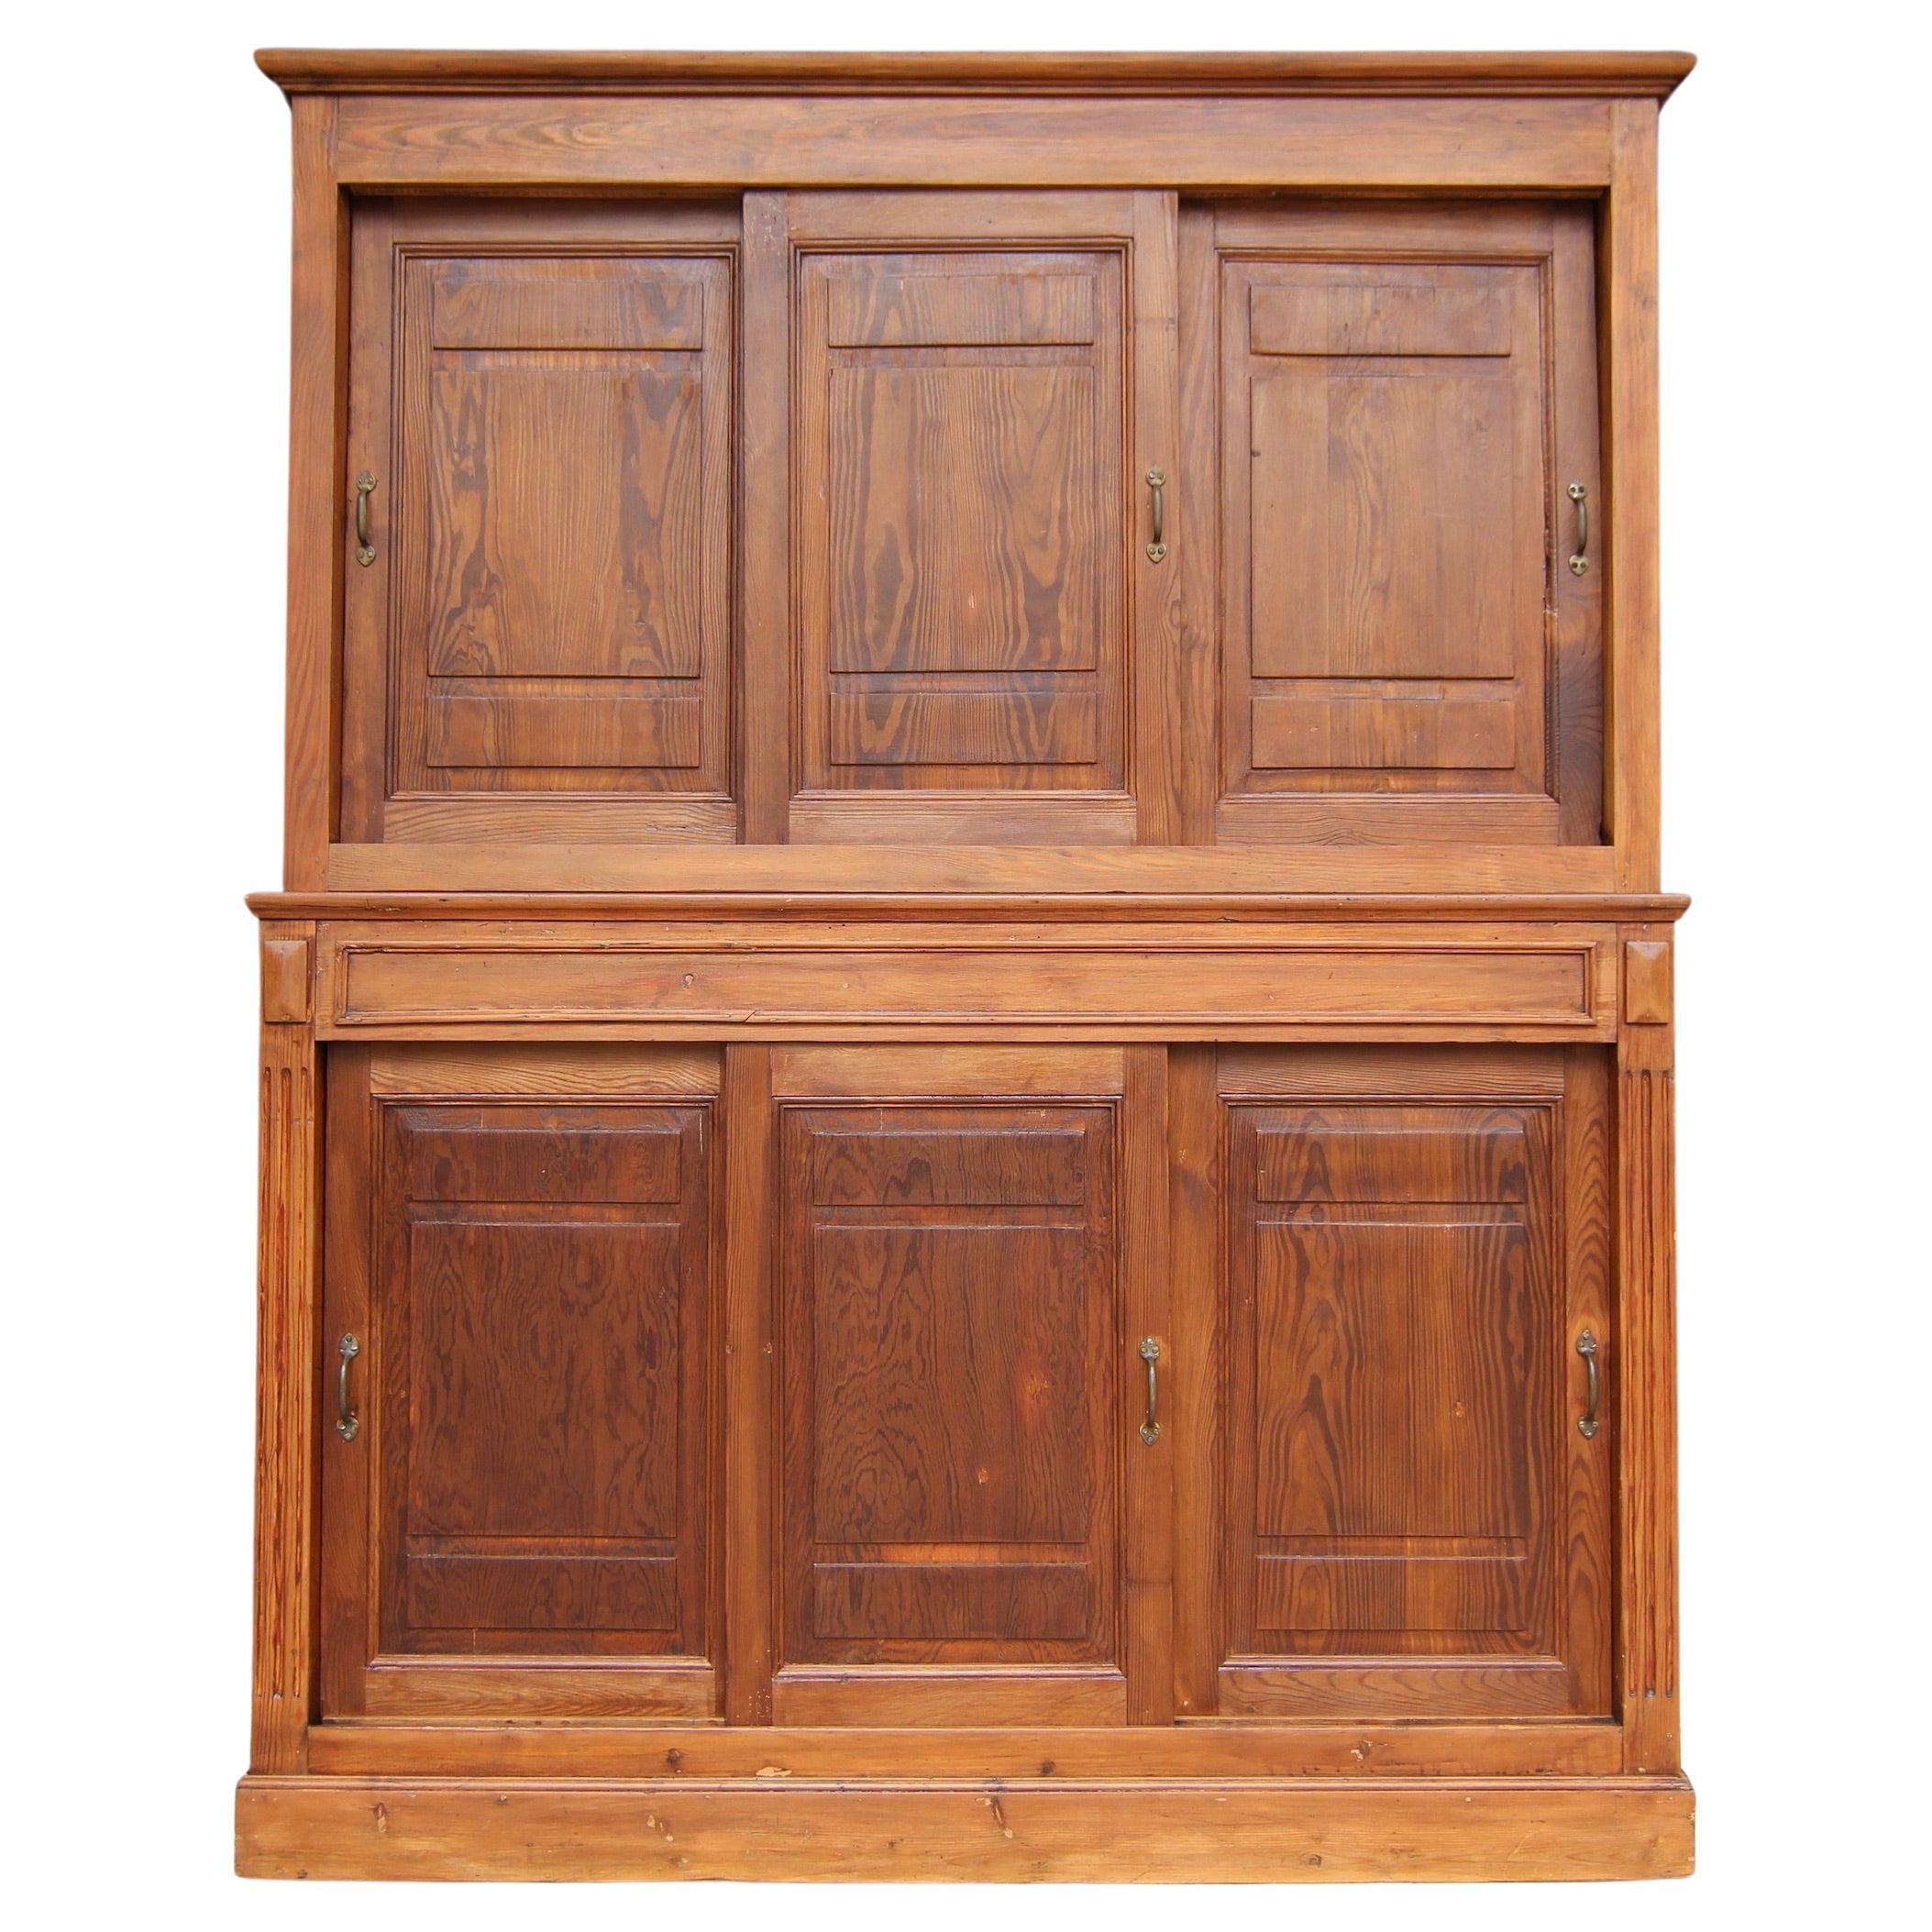 Early 20th Century Pitch Pine Cabinet with Sliding Doors